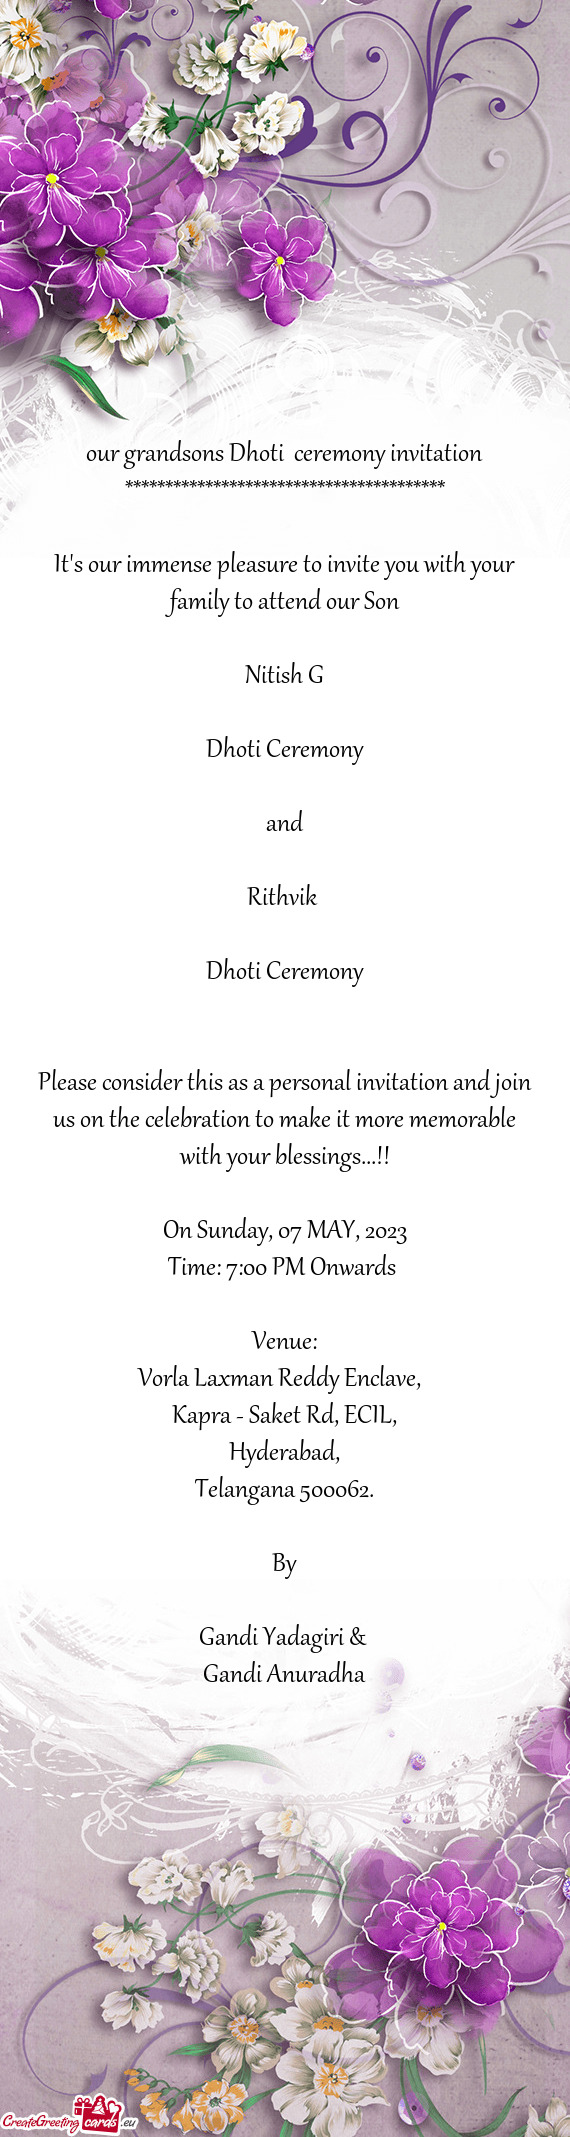 Our grandsons Dhoti ceremony invitation